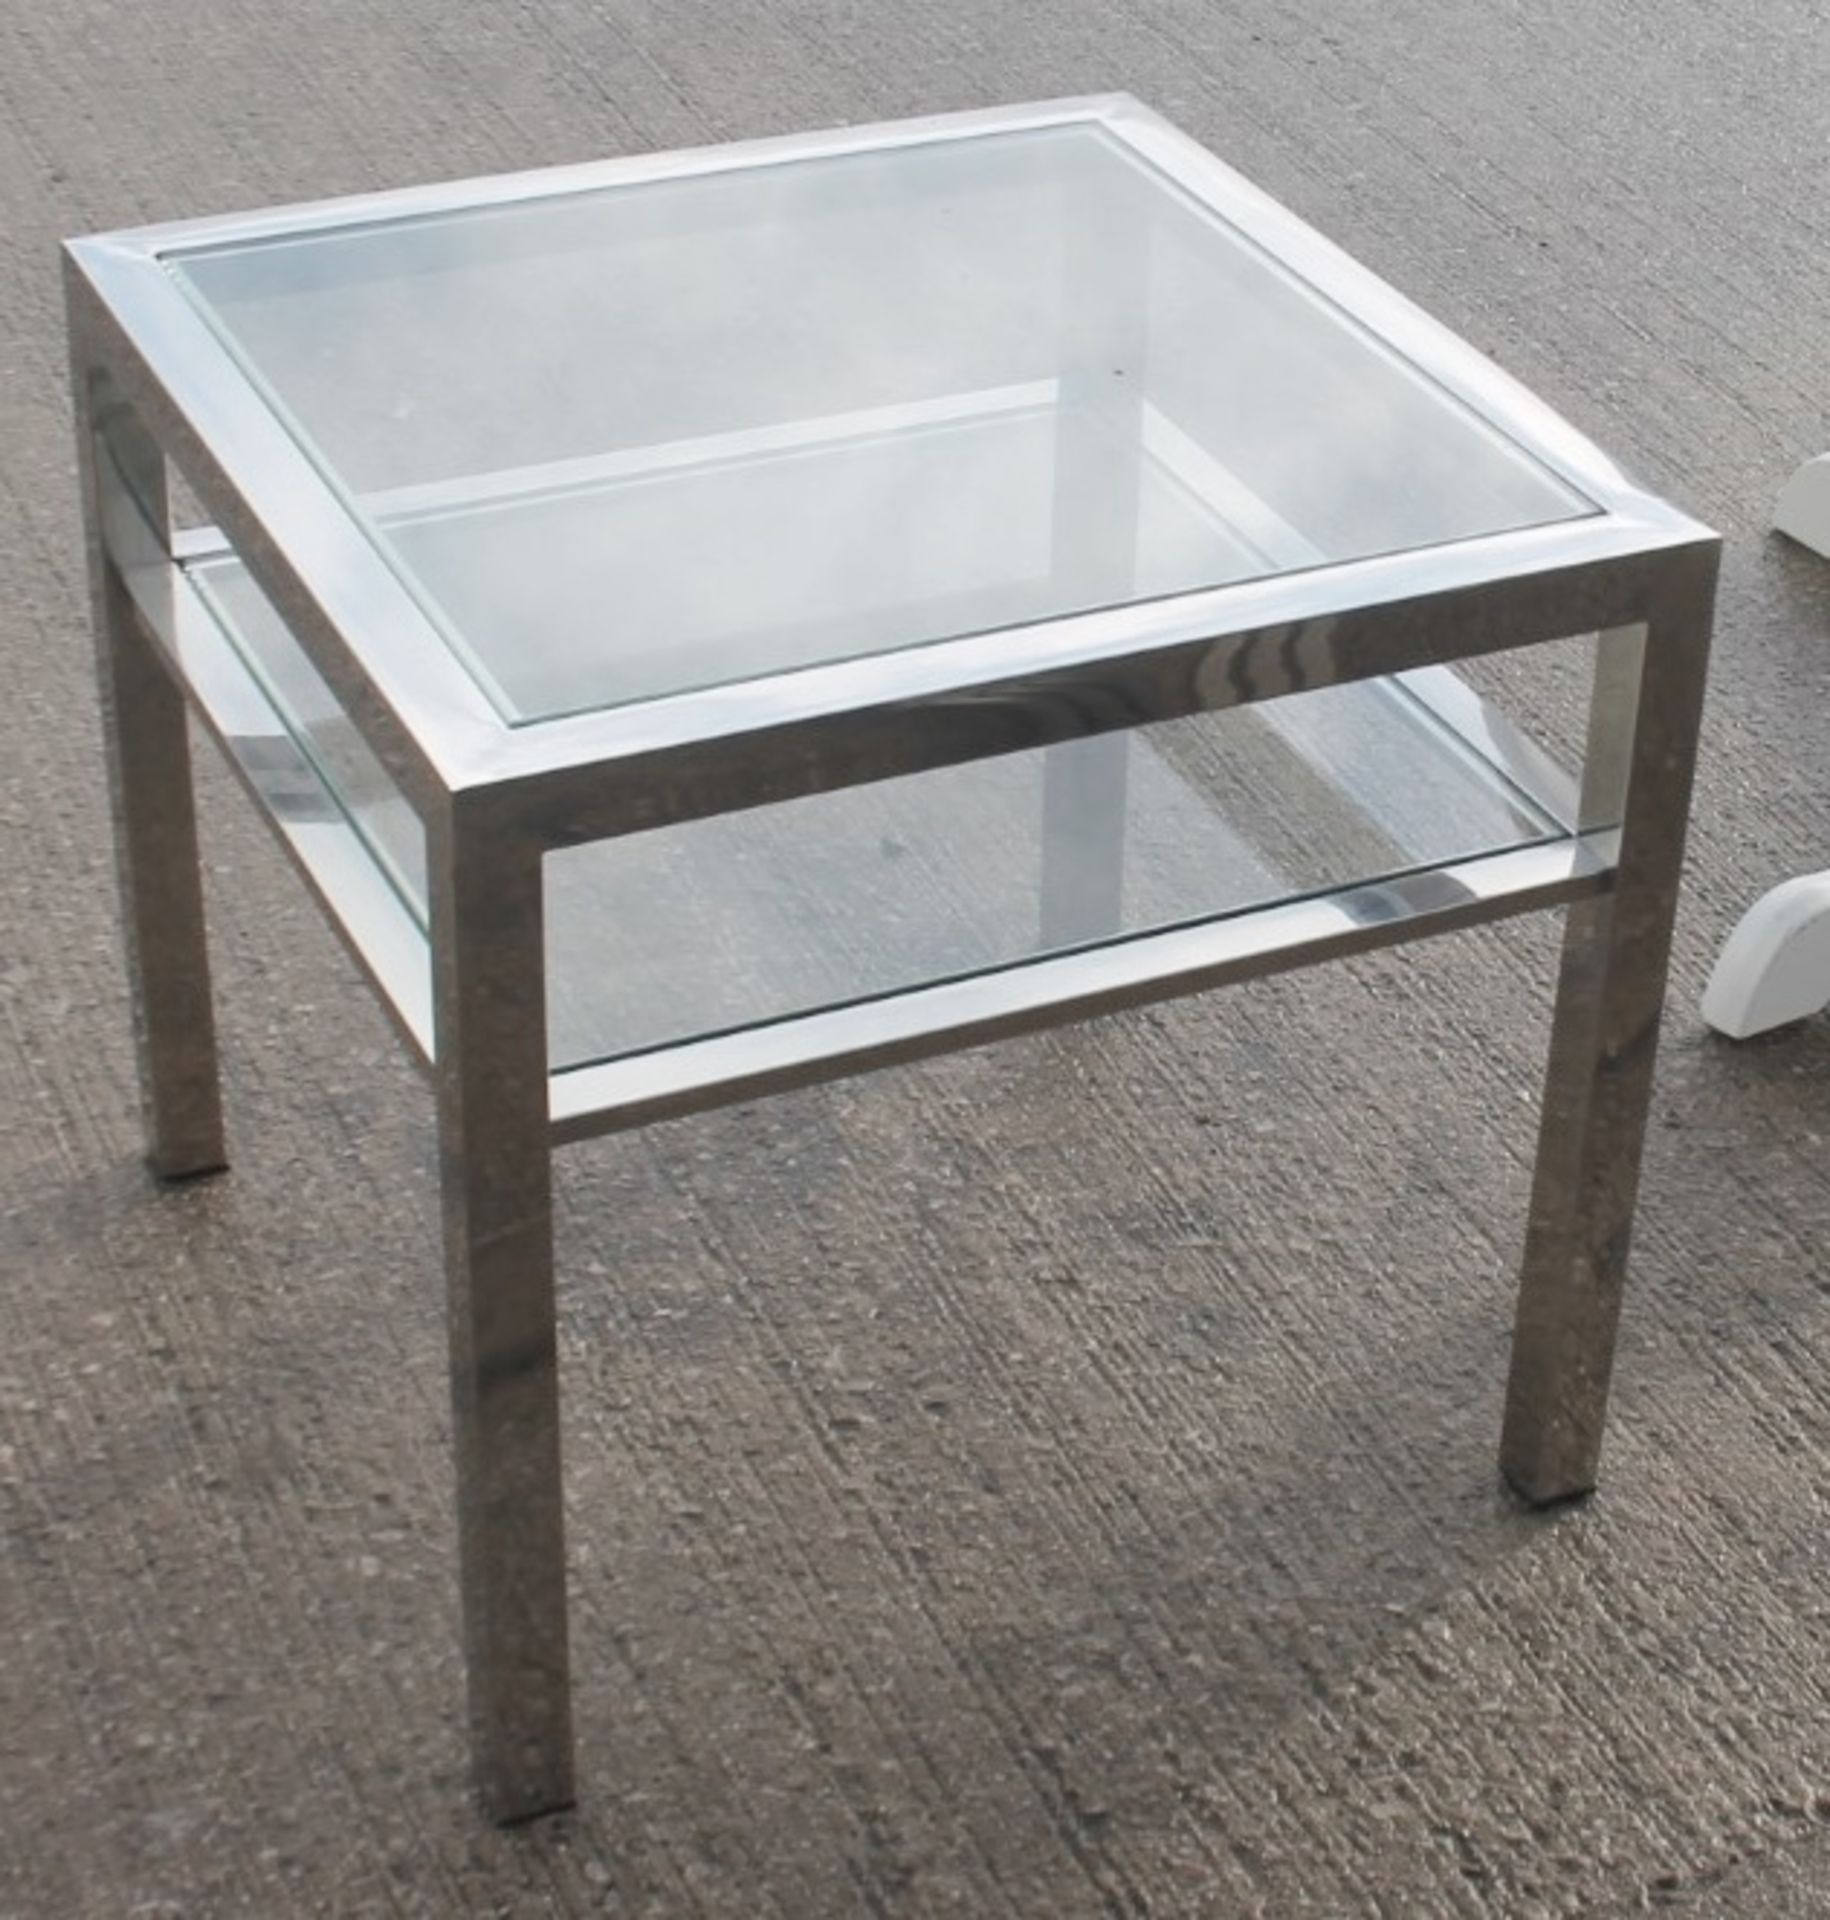 1 x Glass And Chrome Square Side Table - Original Price £200.00